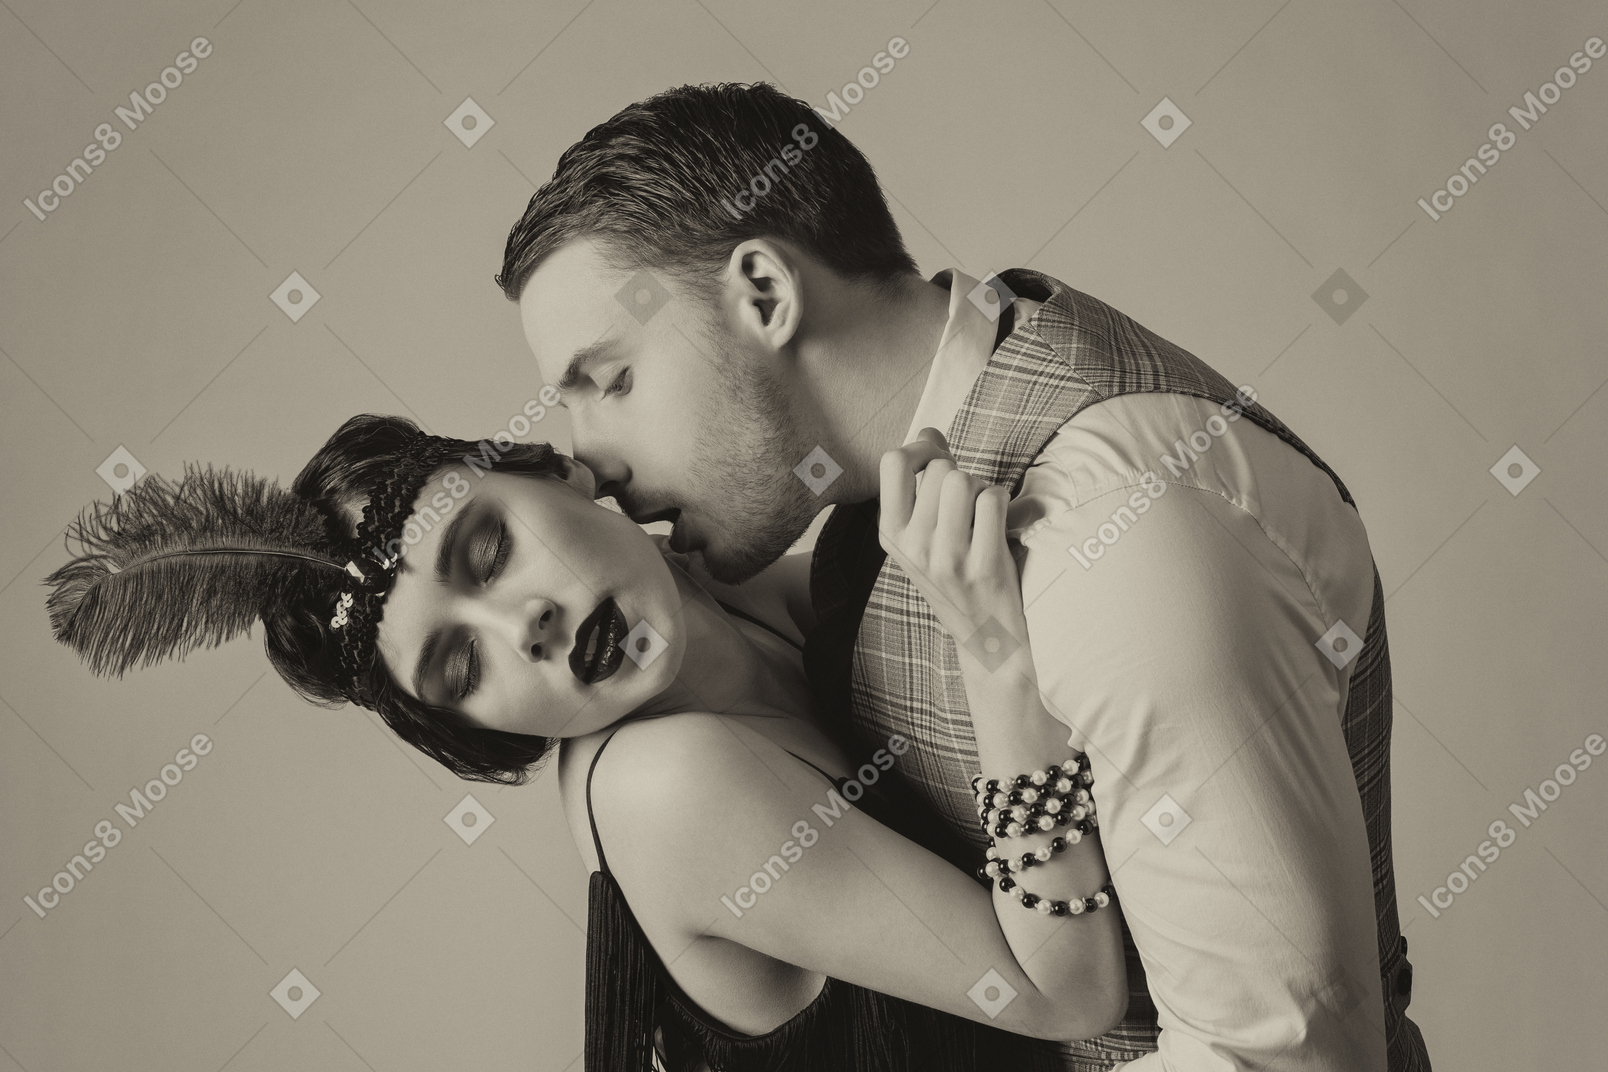 Portrait of passionate young man kissing a flapper